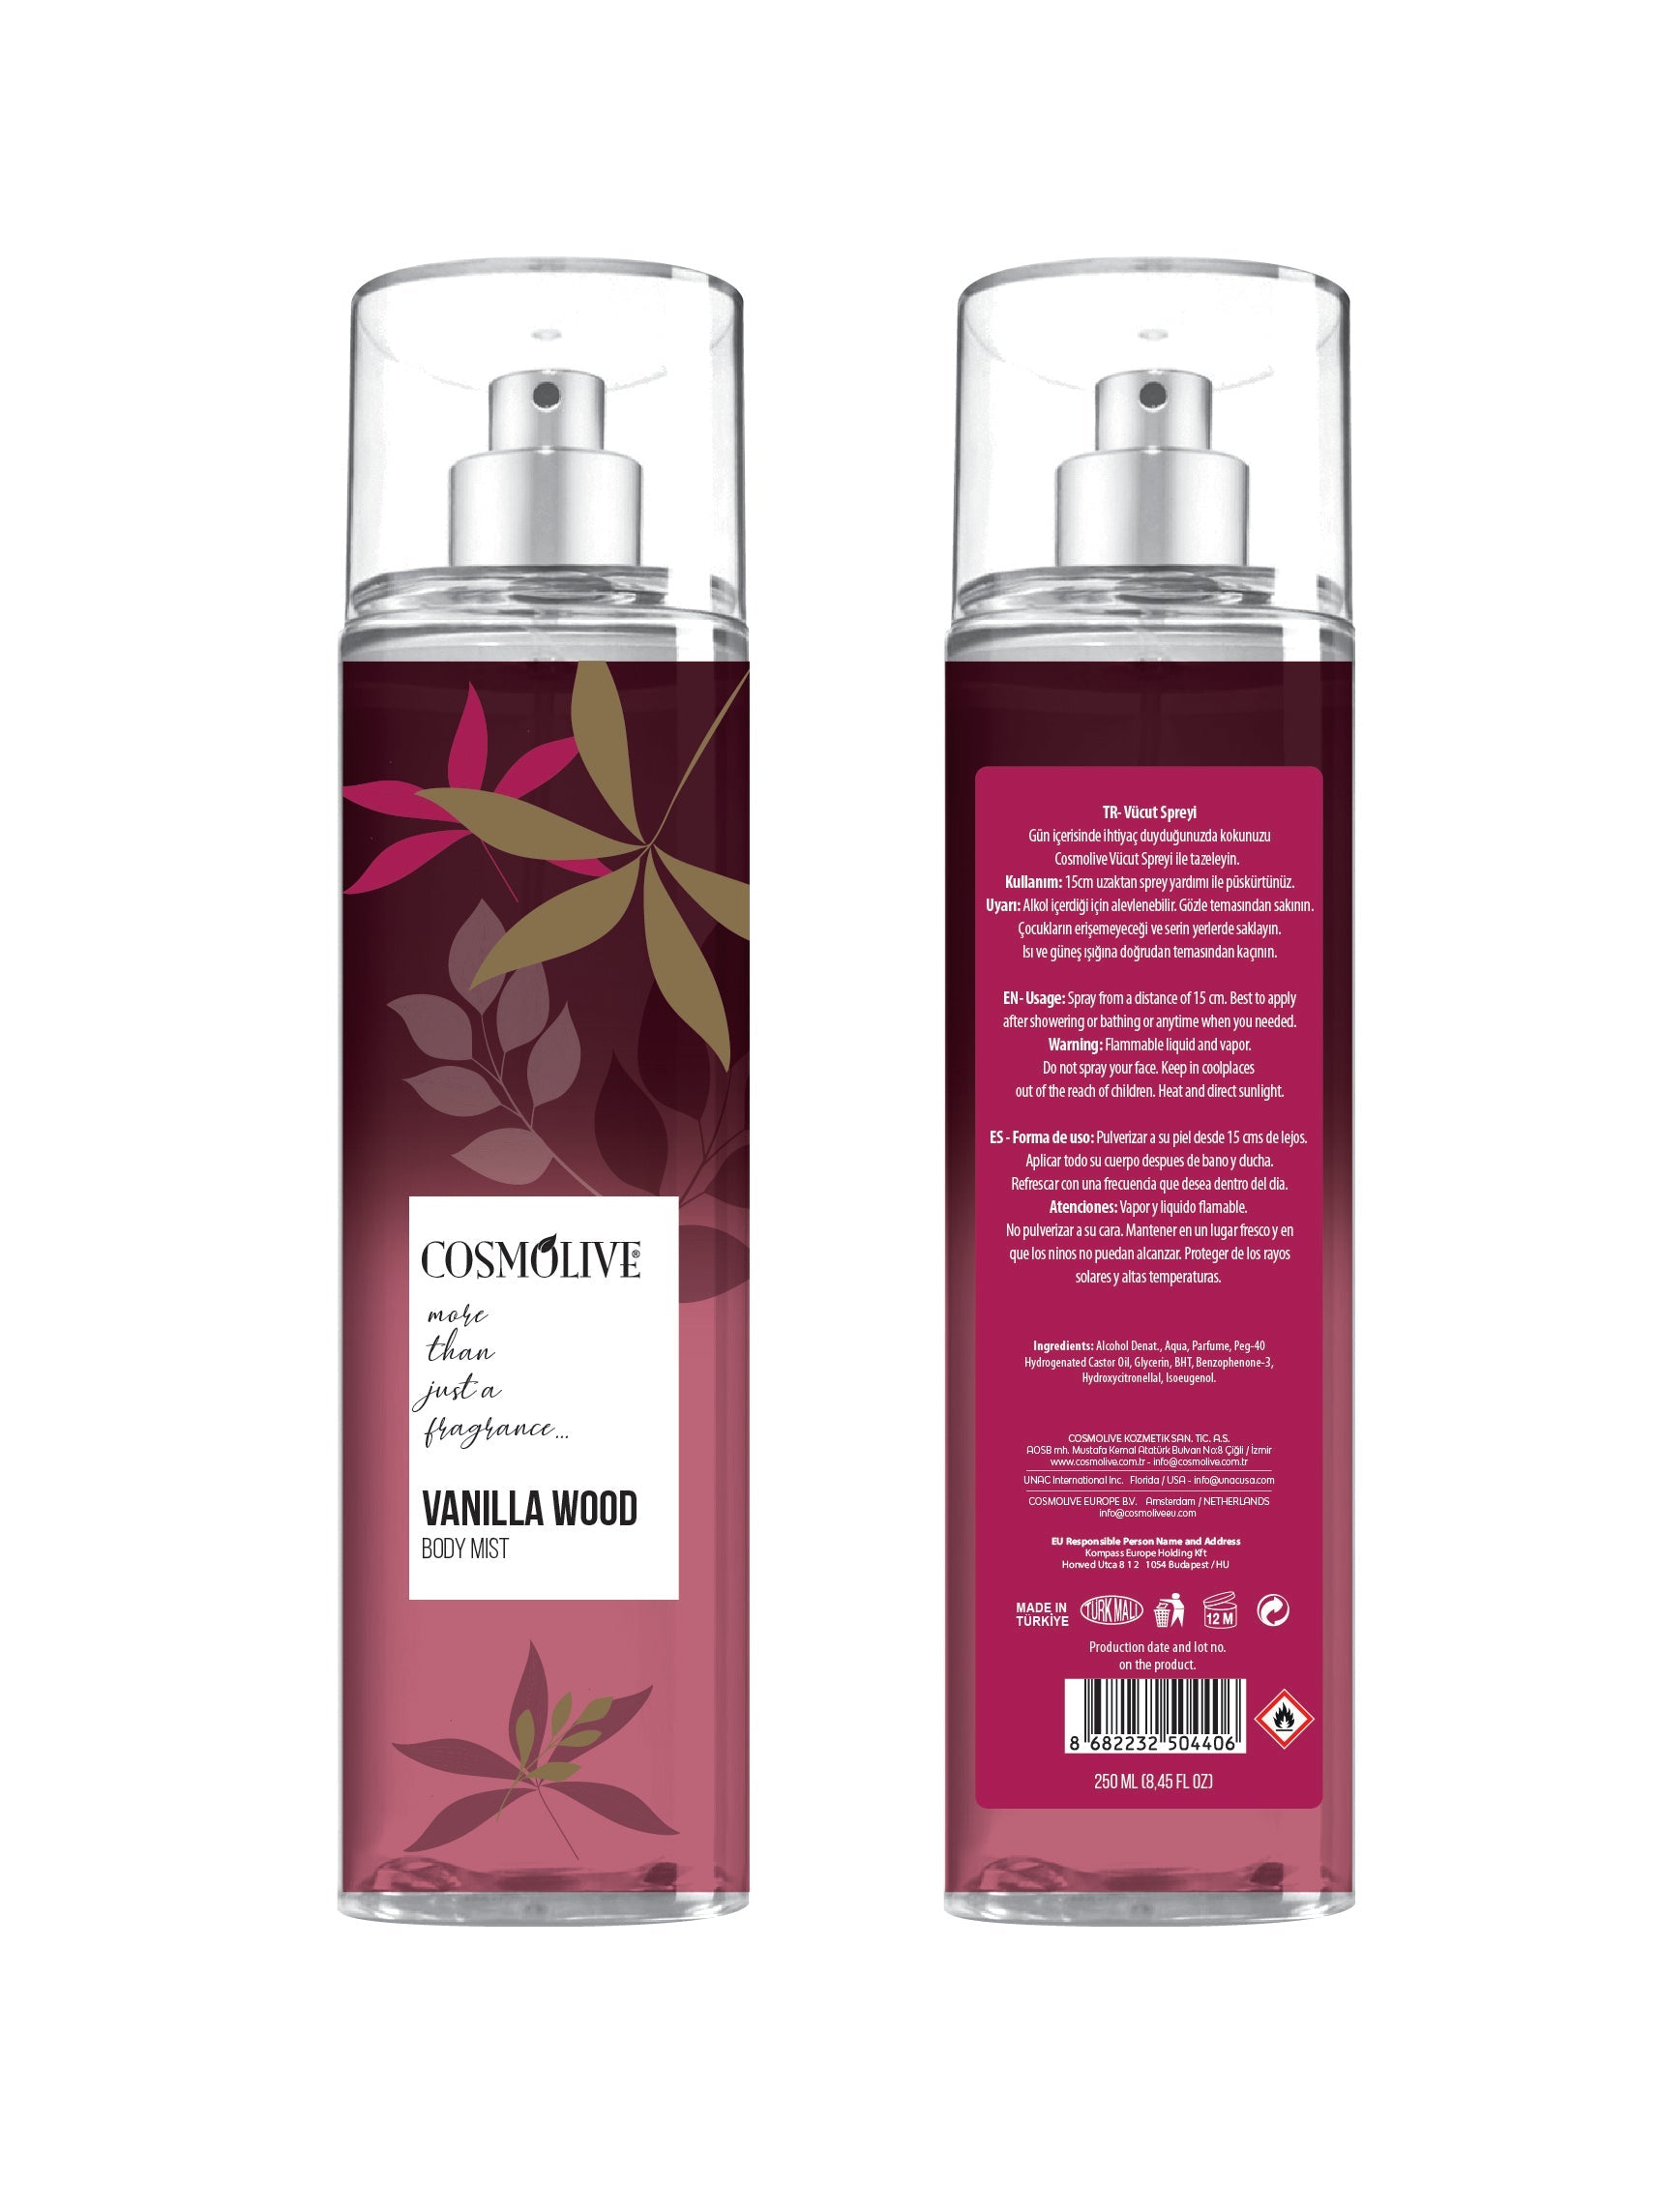 COSMOLIVE BODY MIST 250 ml Vanilla Wood / The Excellent Composition of Nature With The Fruit and Floral Essences / Natural Life